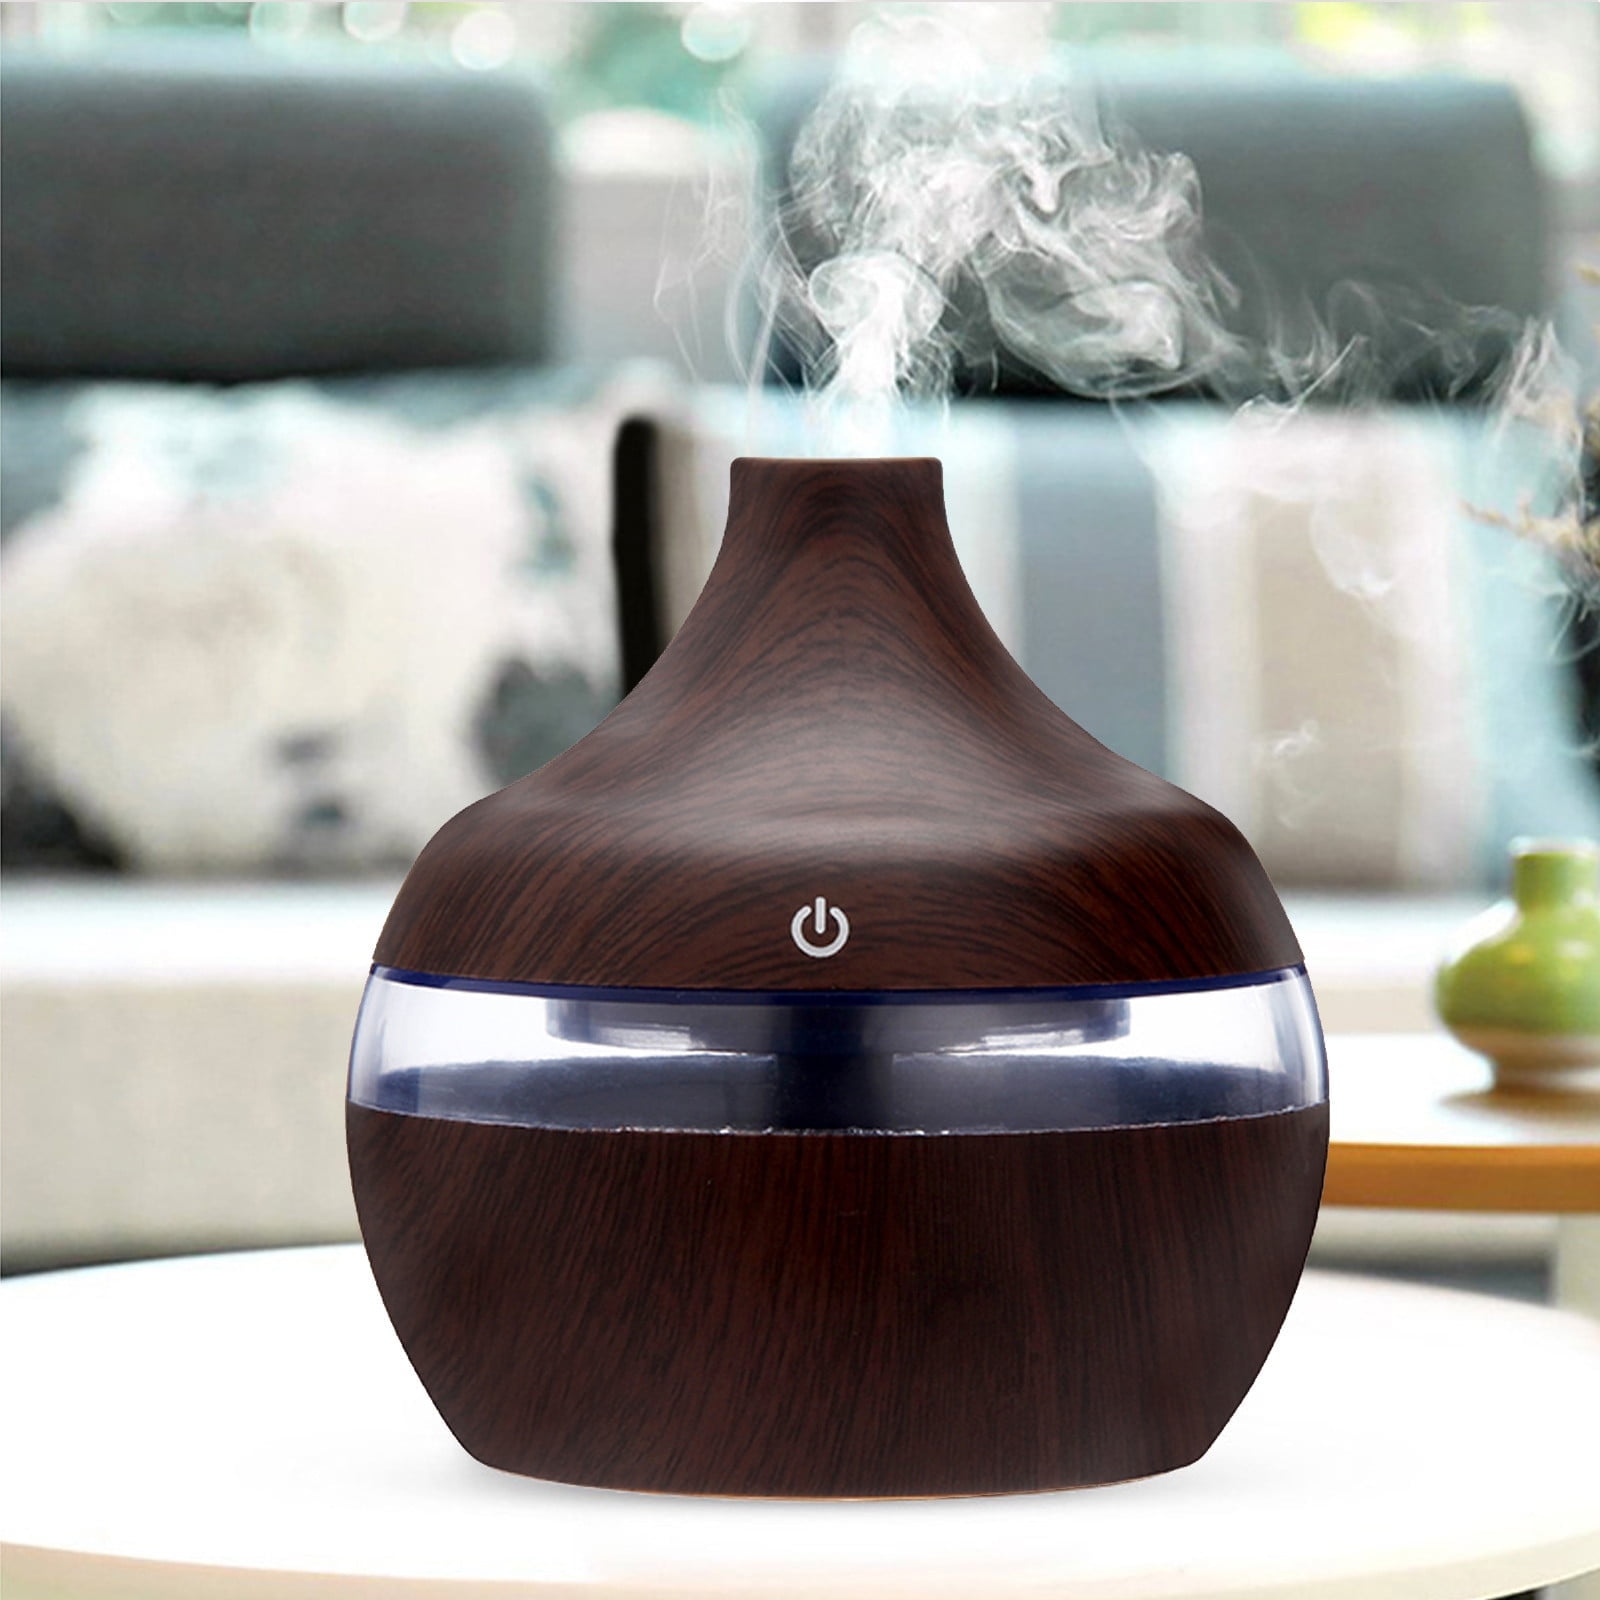 Glass Essential Oil Diffuser Humidifier, [Plastic Free] Glass Reservoir  Natural Wood Base, Waterless Auto Shut-Off 7 Colors Lights Aroma Diffusers  for Bedroom Home Room Office Yoga Mom Wife Gift 80 ML